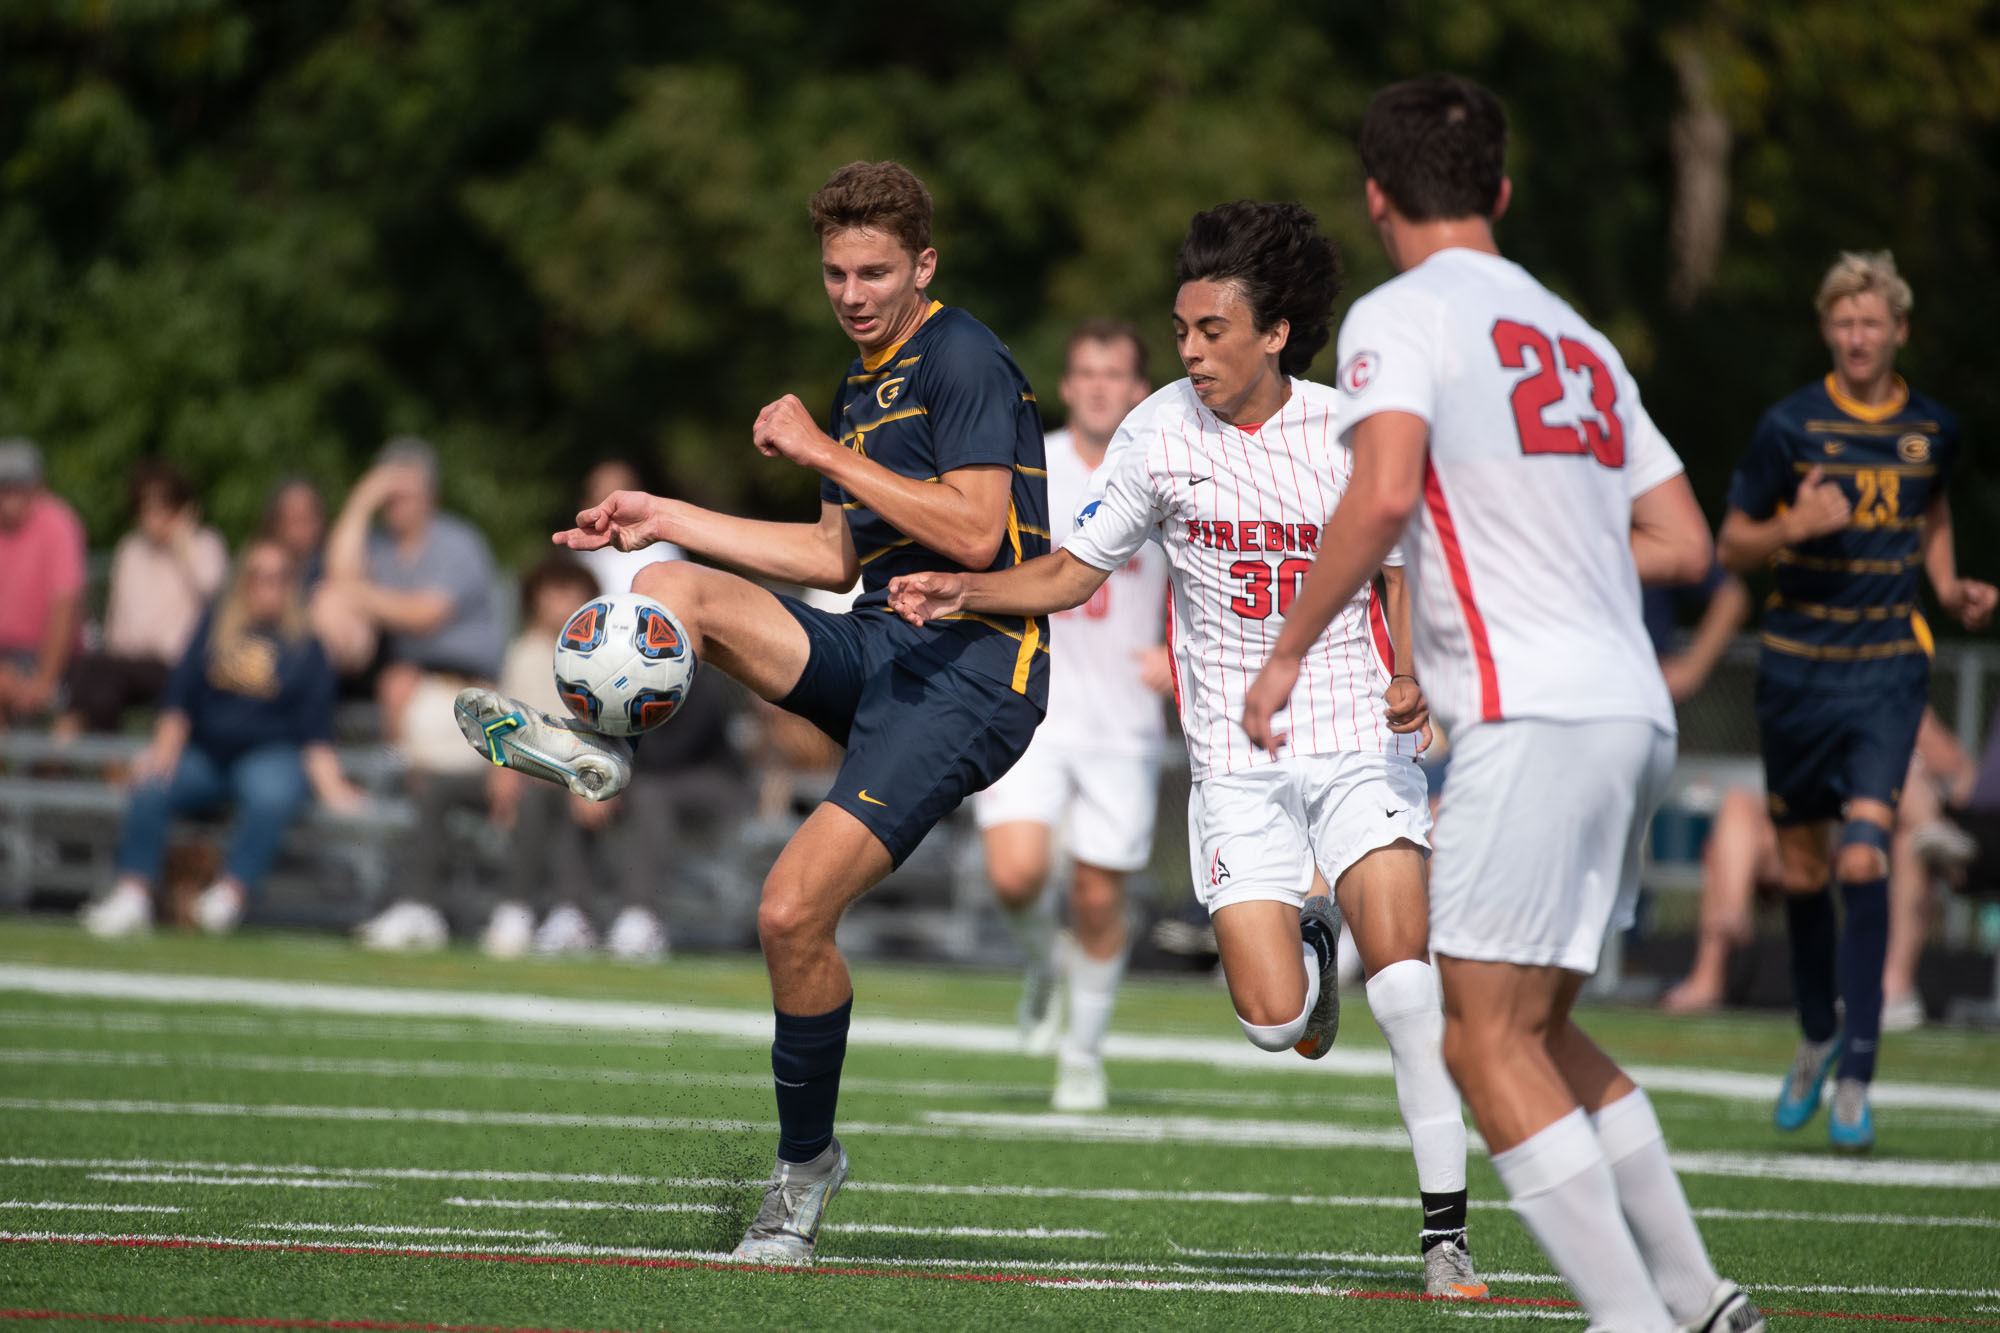 Three Goals from Set Pieces Earn Men's Soccer Tenth Win in a Row